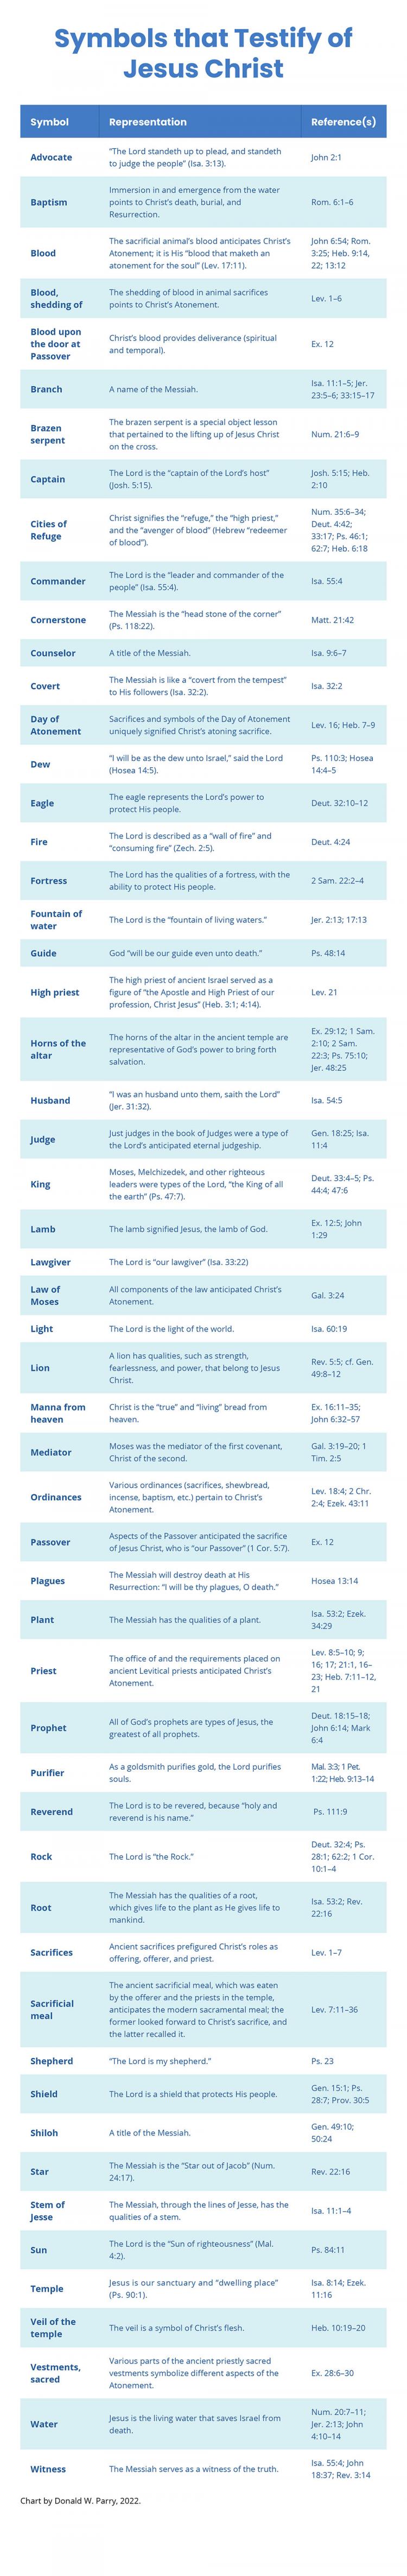 Chart by Donald W. Parry. Symbols That Testify of Jesus Christ.